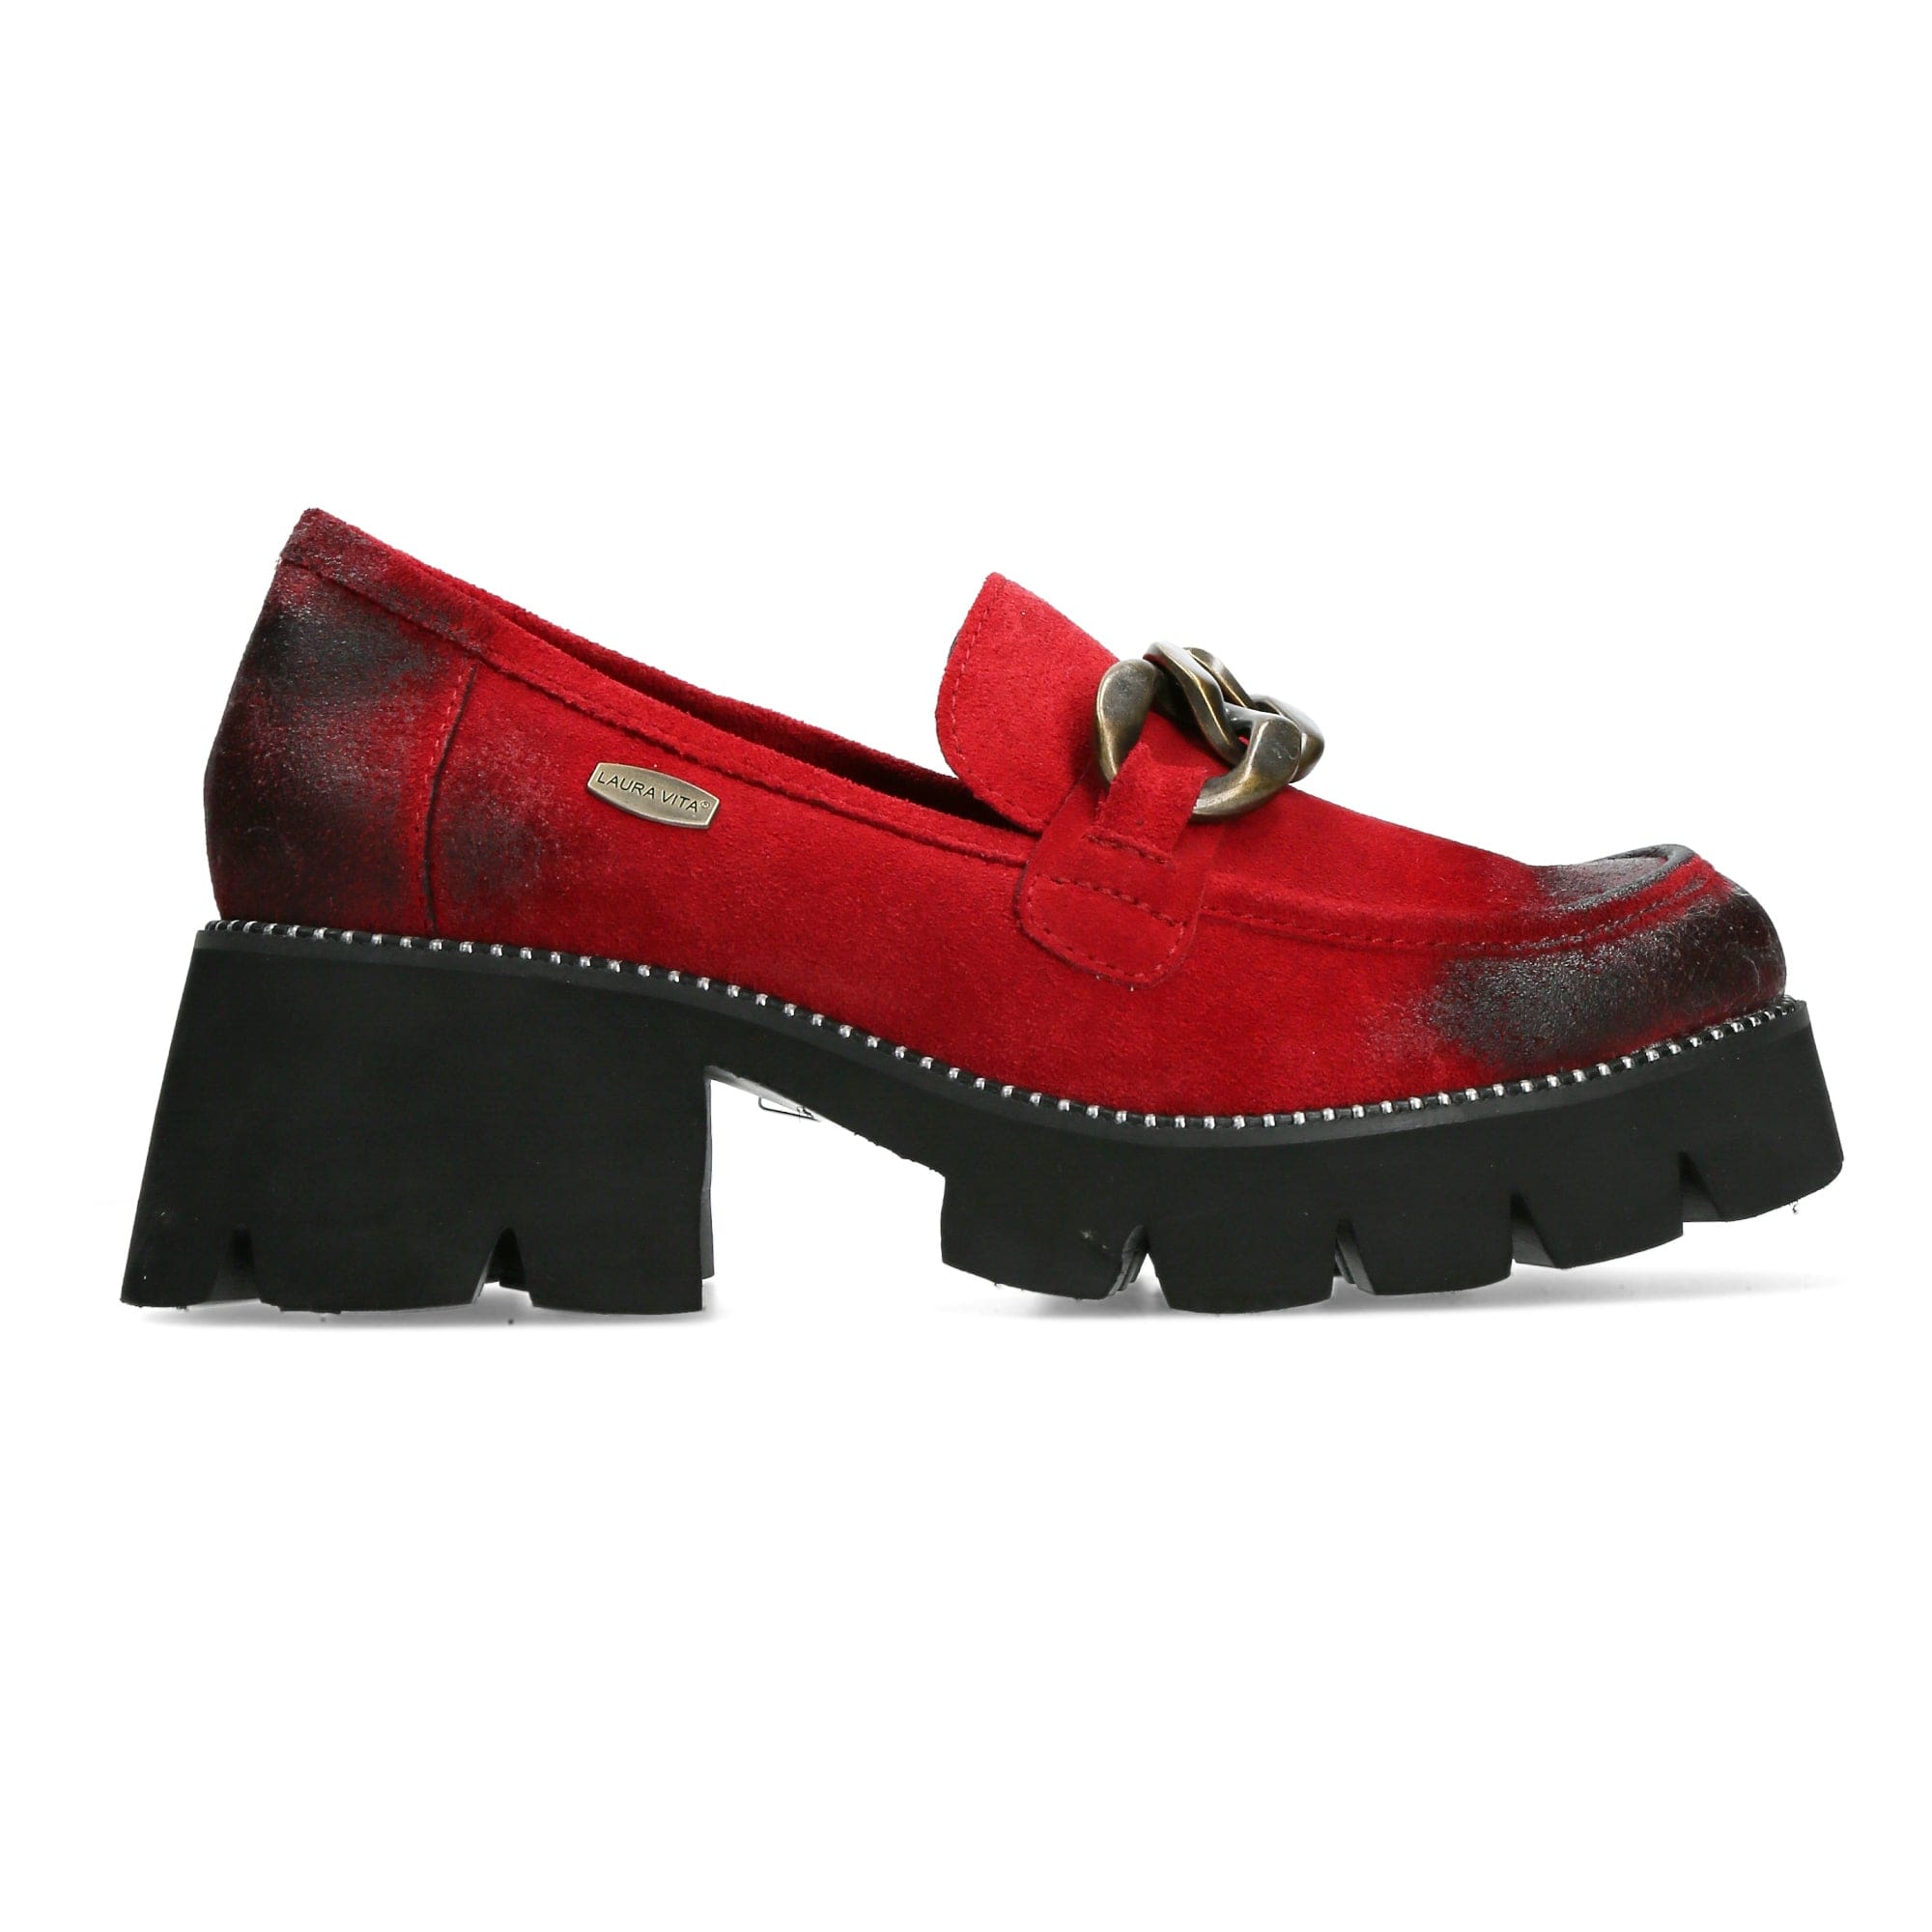 Chaussure OMIO 07 - 35 / Rouge - Mocassin